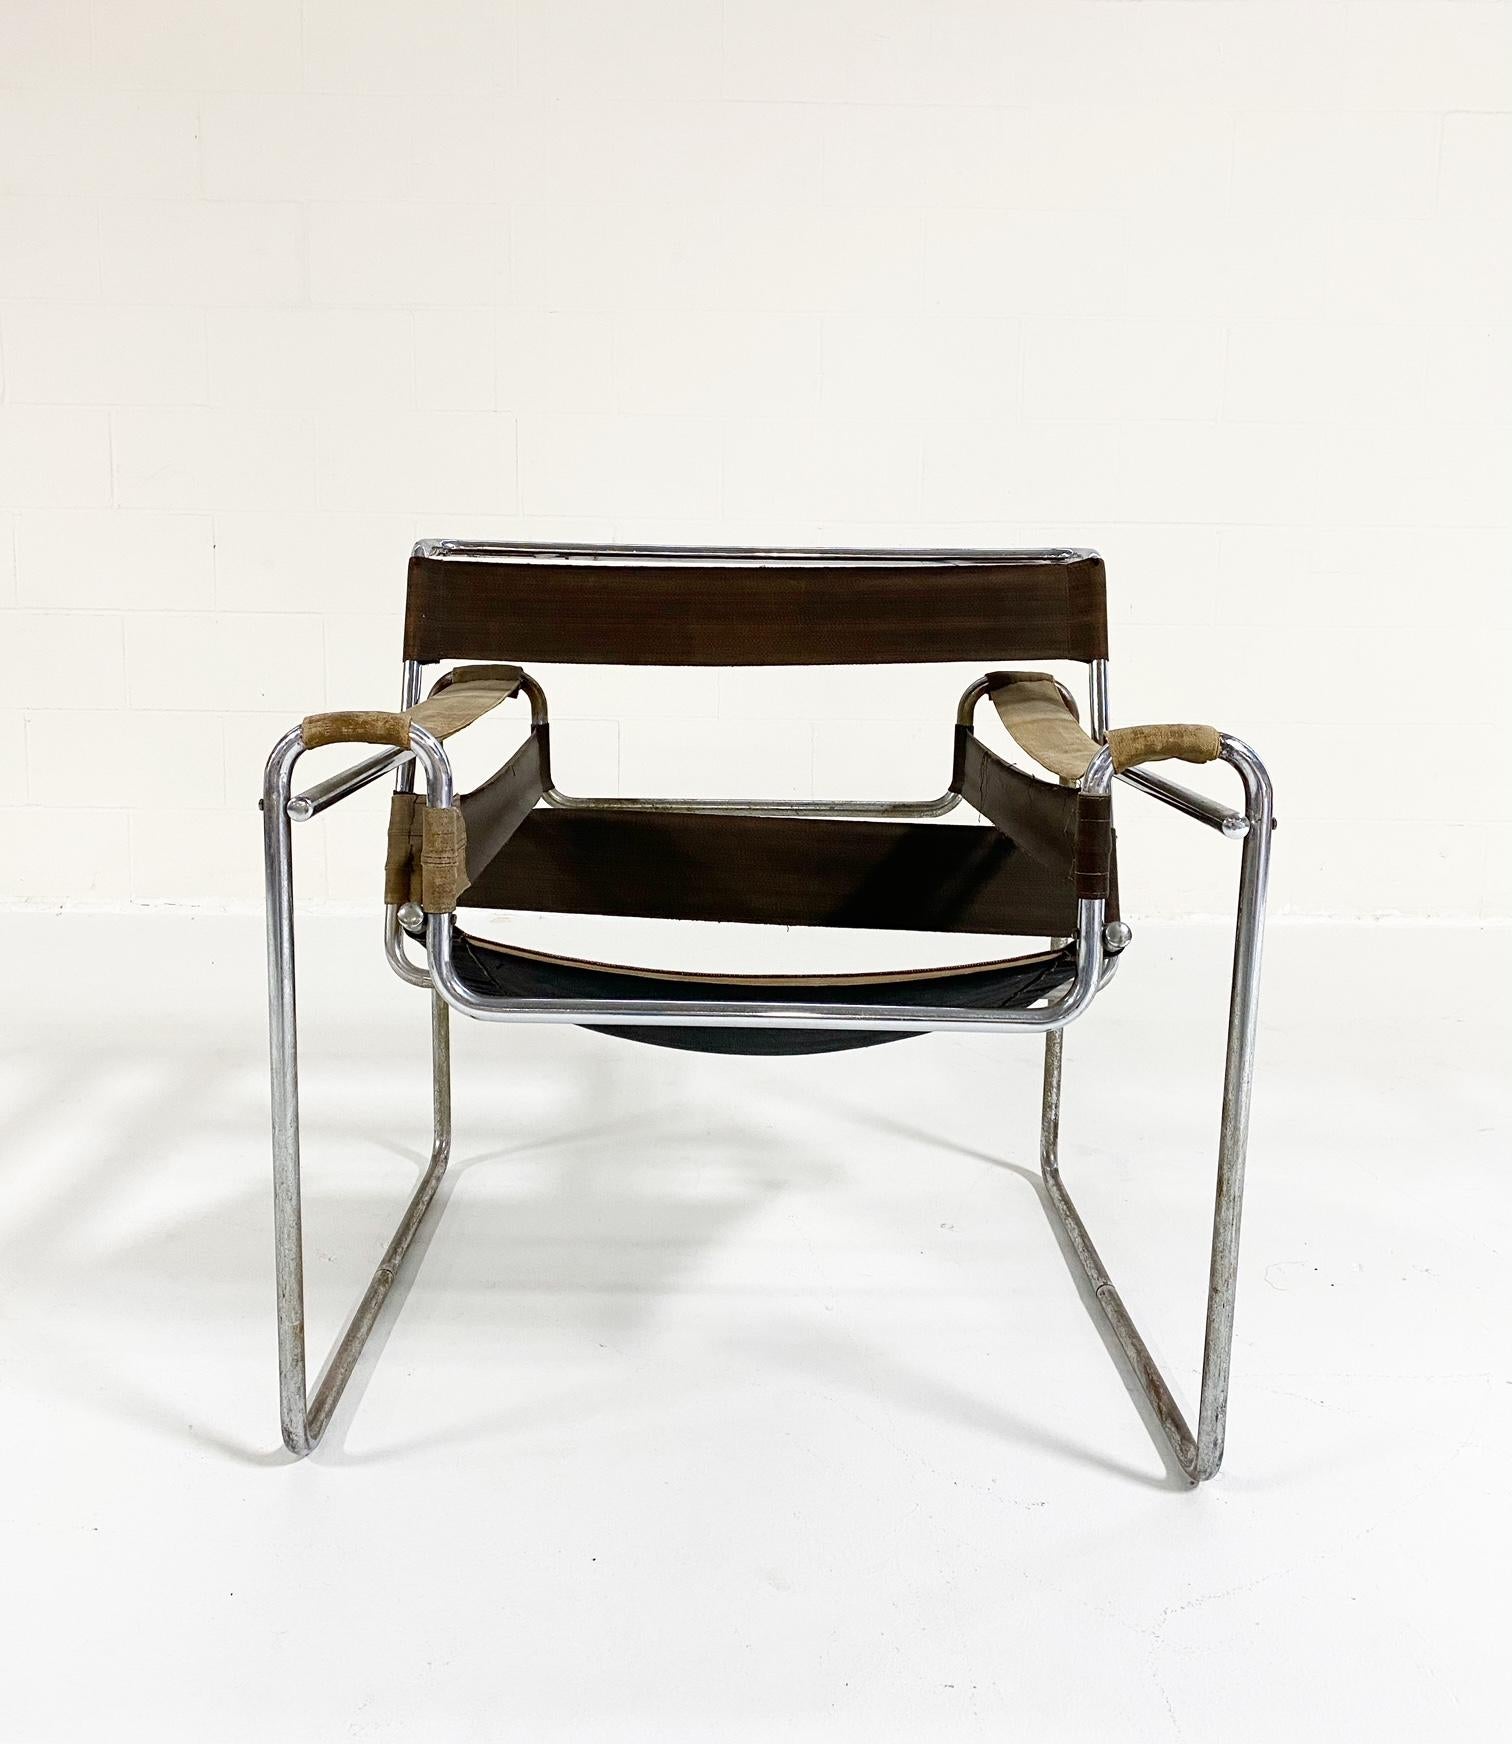 which existing product inspired marcel breuer’s armchair